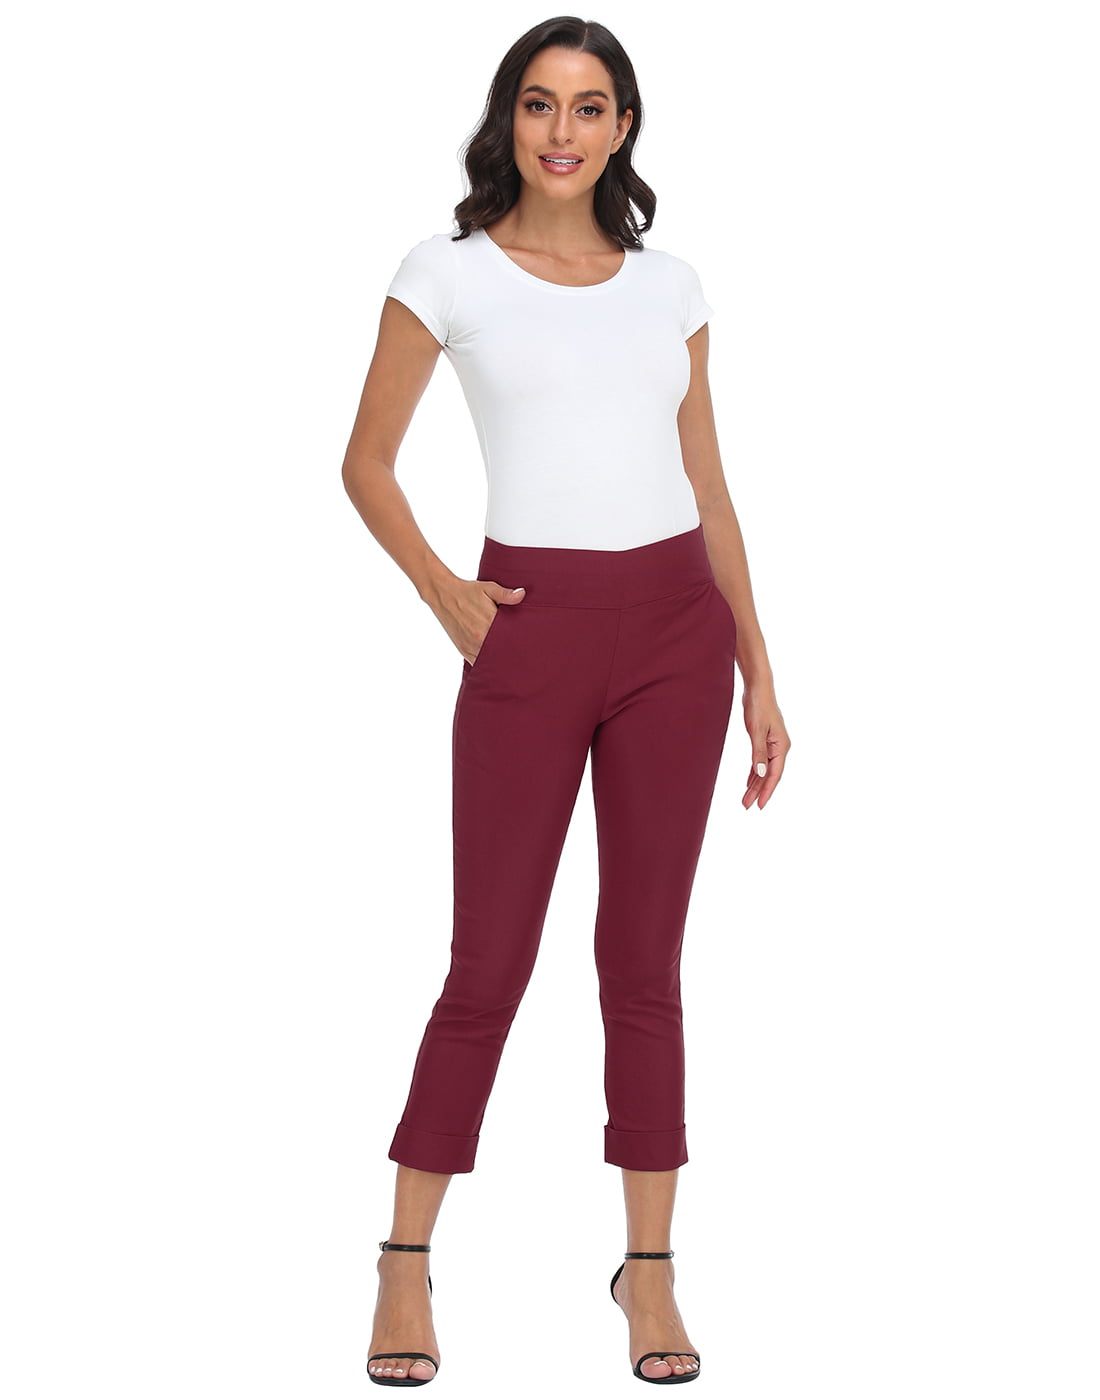 Stylish womens Trousers & Pants / Cigarette Pent for women, Maroon Red Ladies  Pant (Maroon)